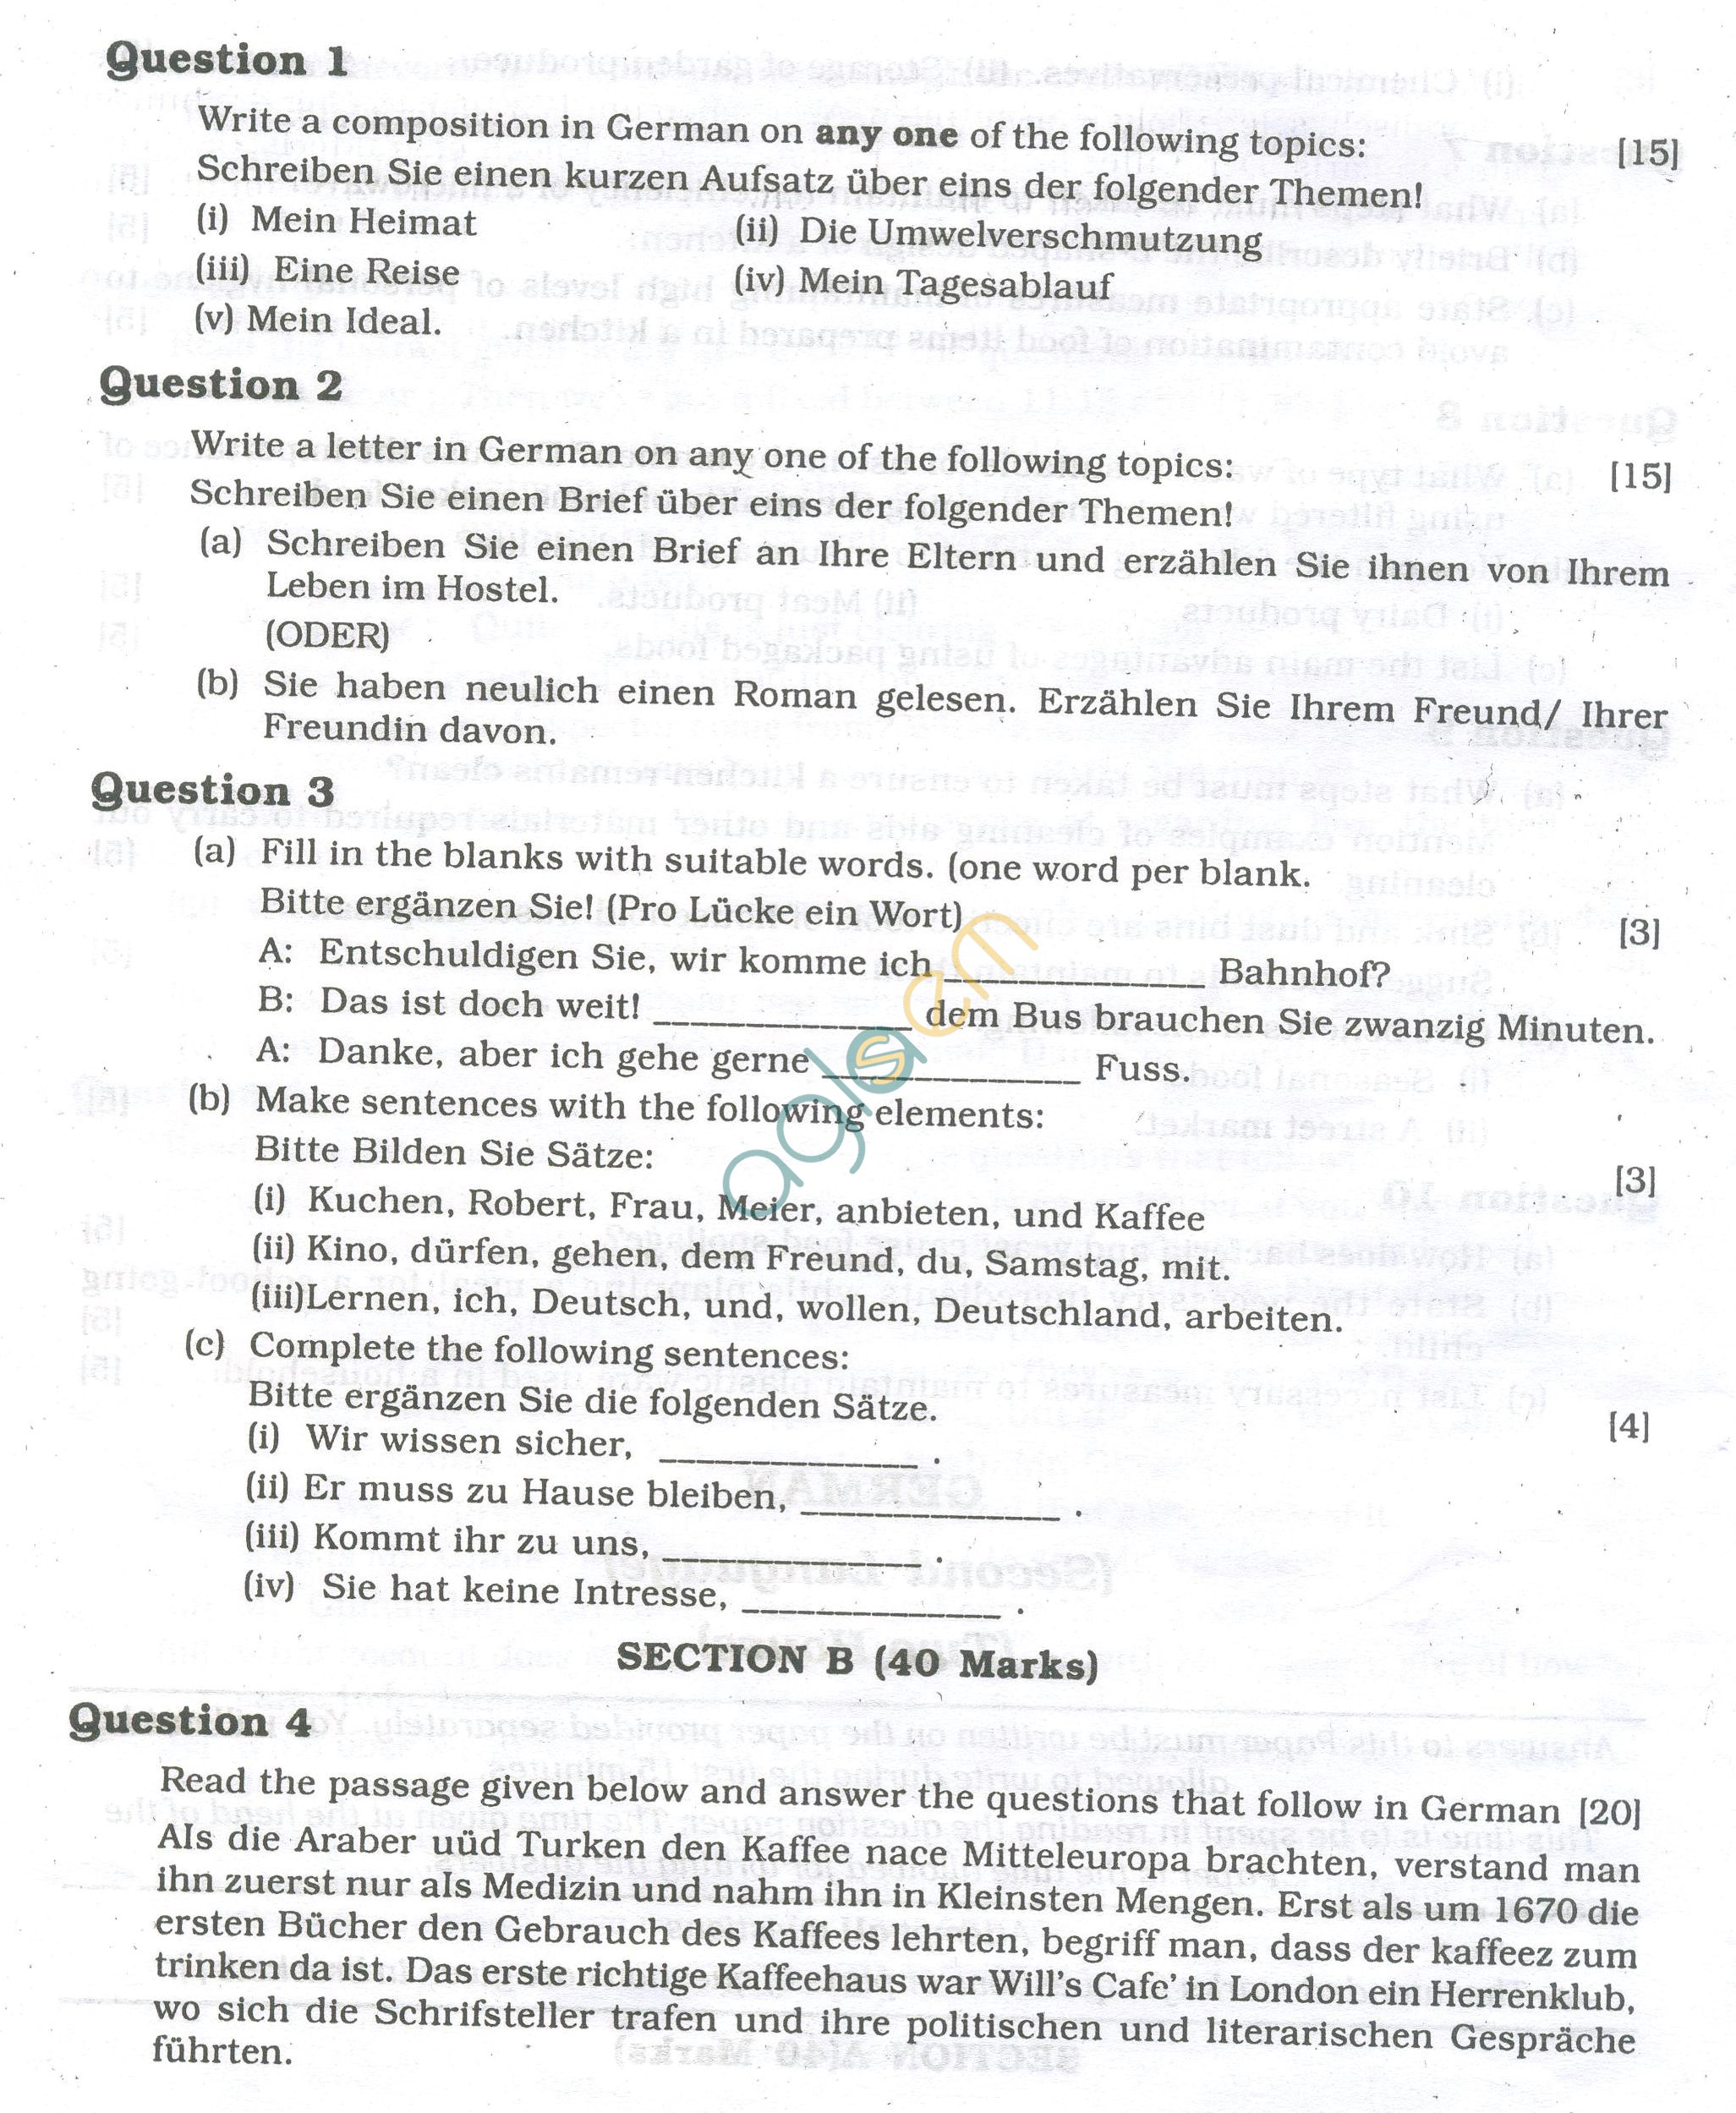 ICSE Question Papers 2013 for Class 10 - German/